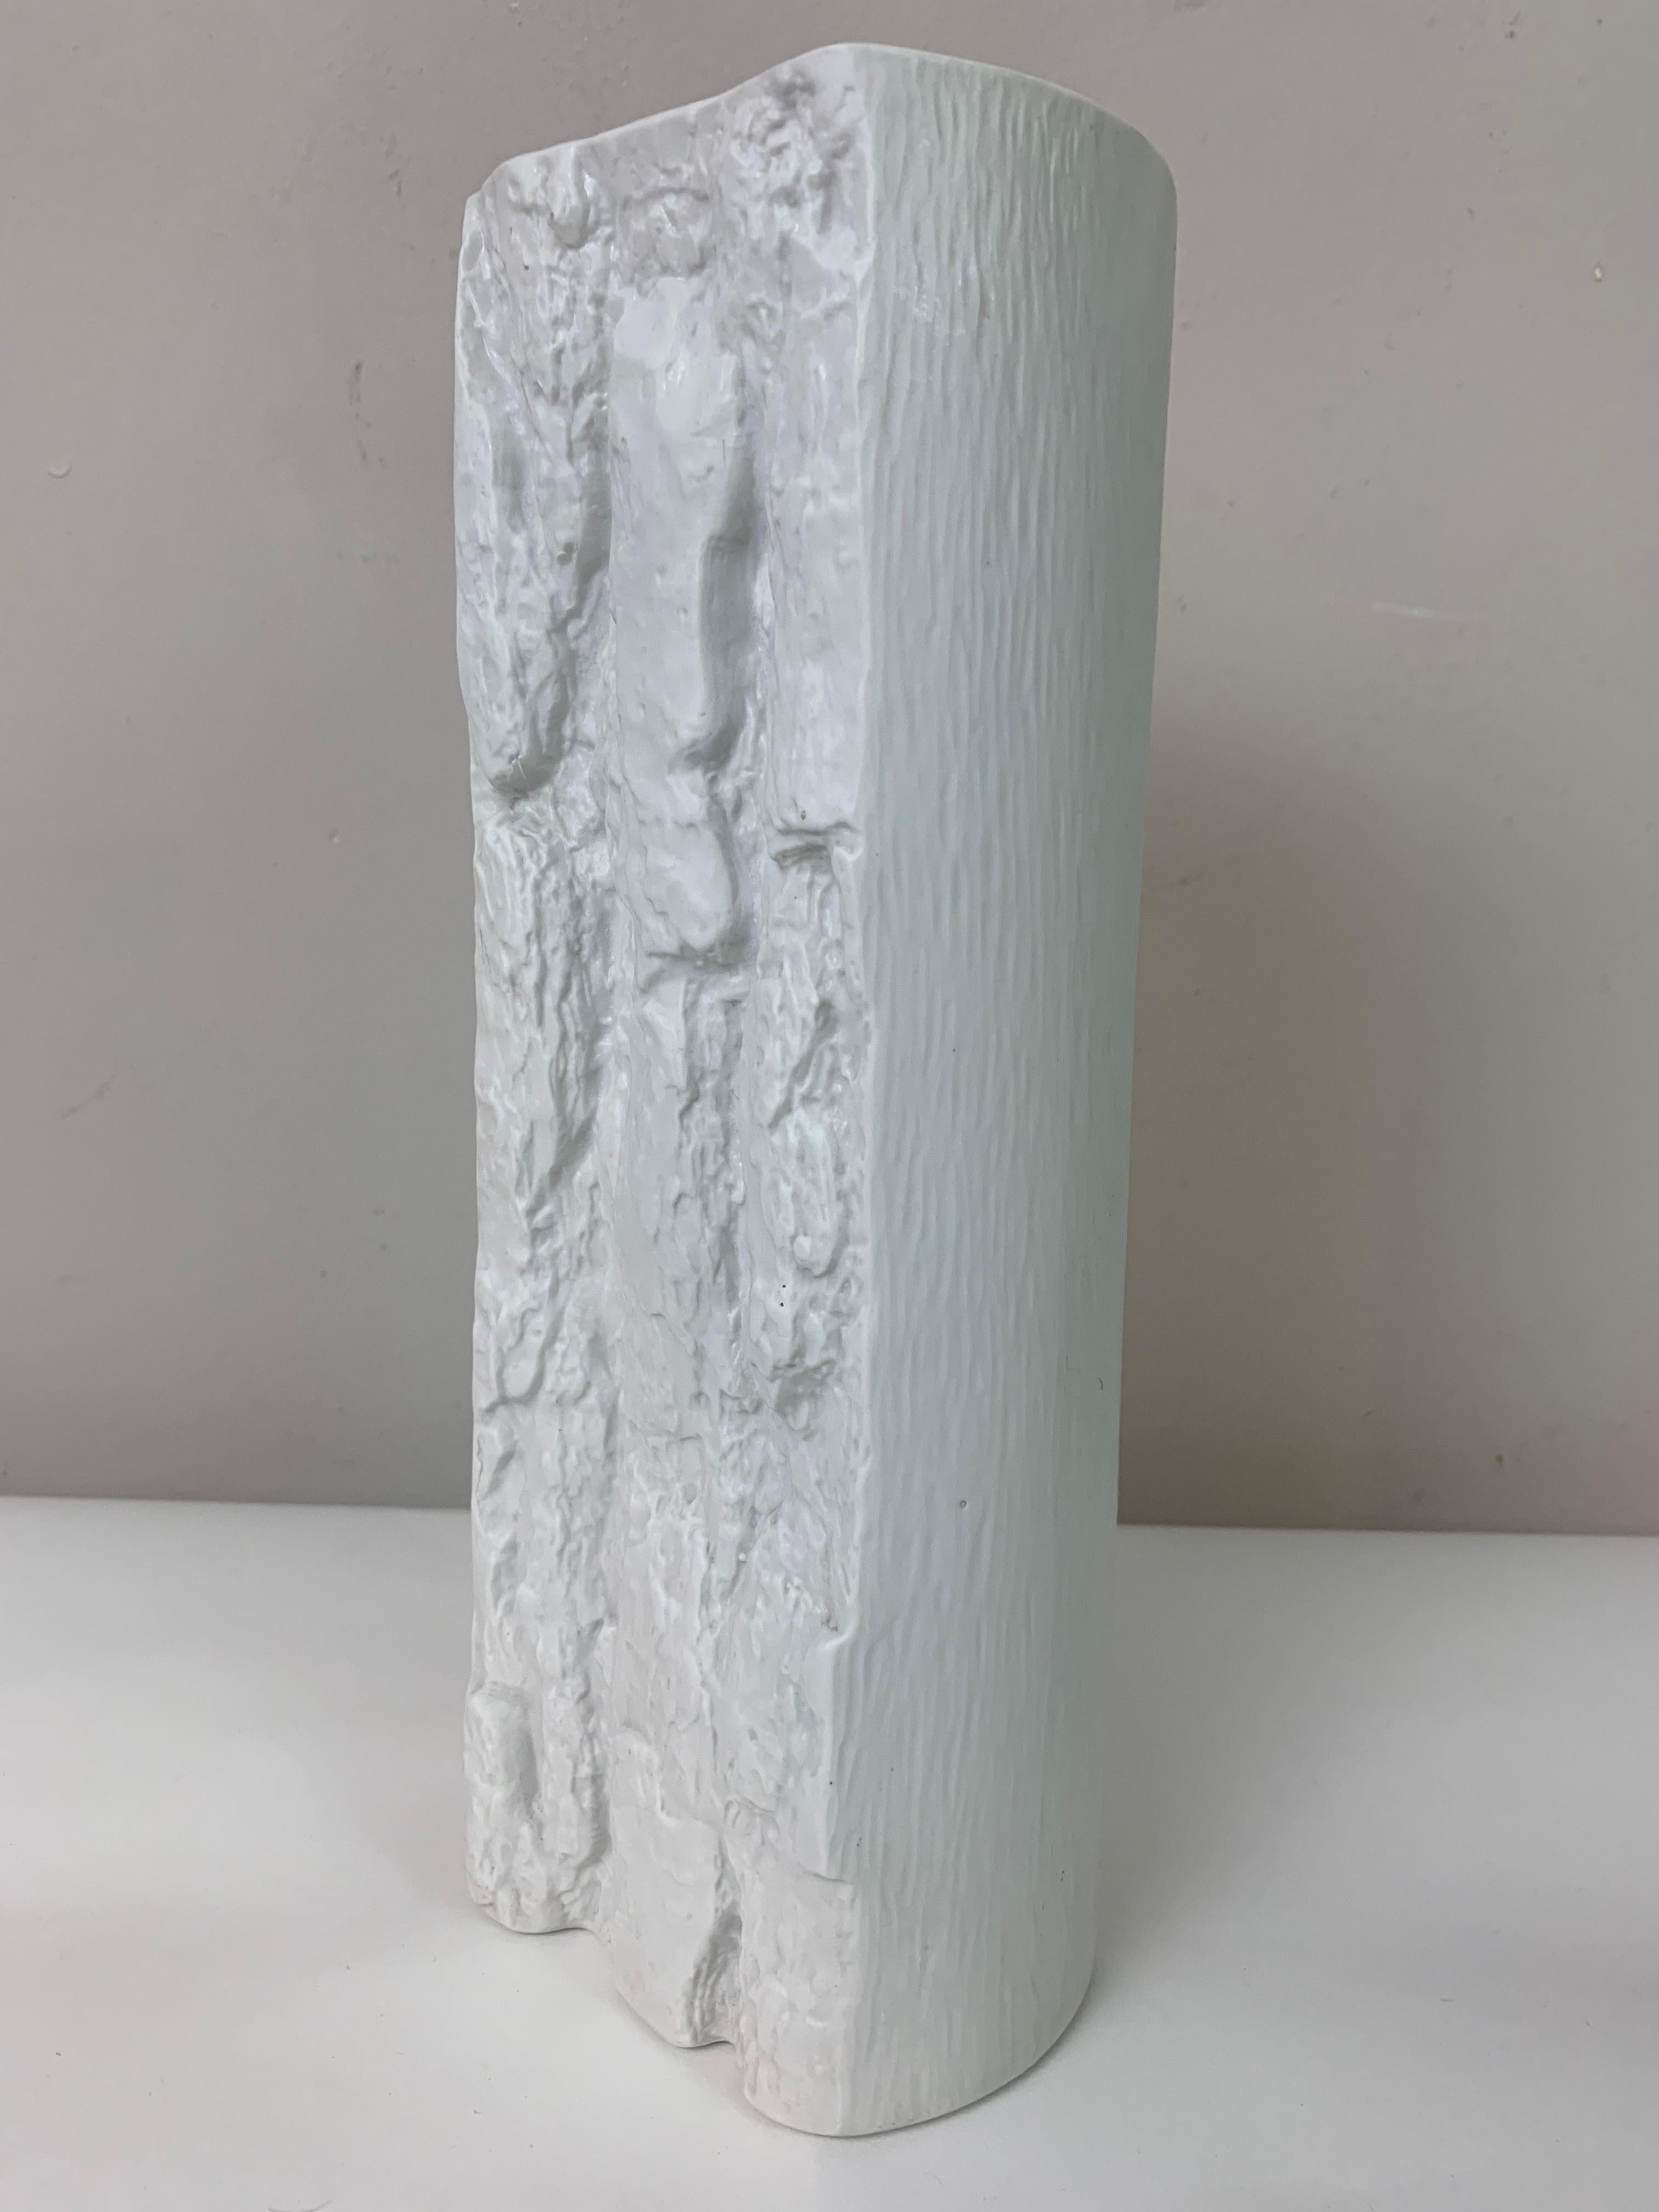 1970s Op Art West Germany white matt bisque rectangular porcelain vase with a bark relief design on the front and back with contrasting smooth lined sides. Designed by Ernst Fenzi. Manufactured in Bareuther Waldsassen, Bavaria, West